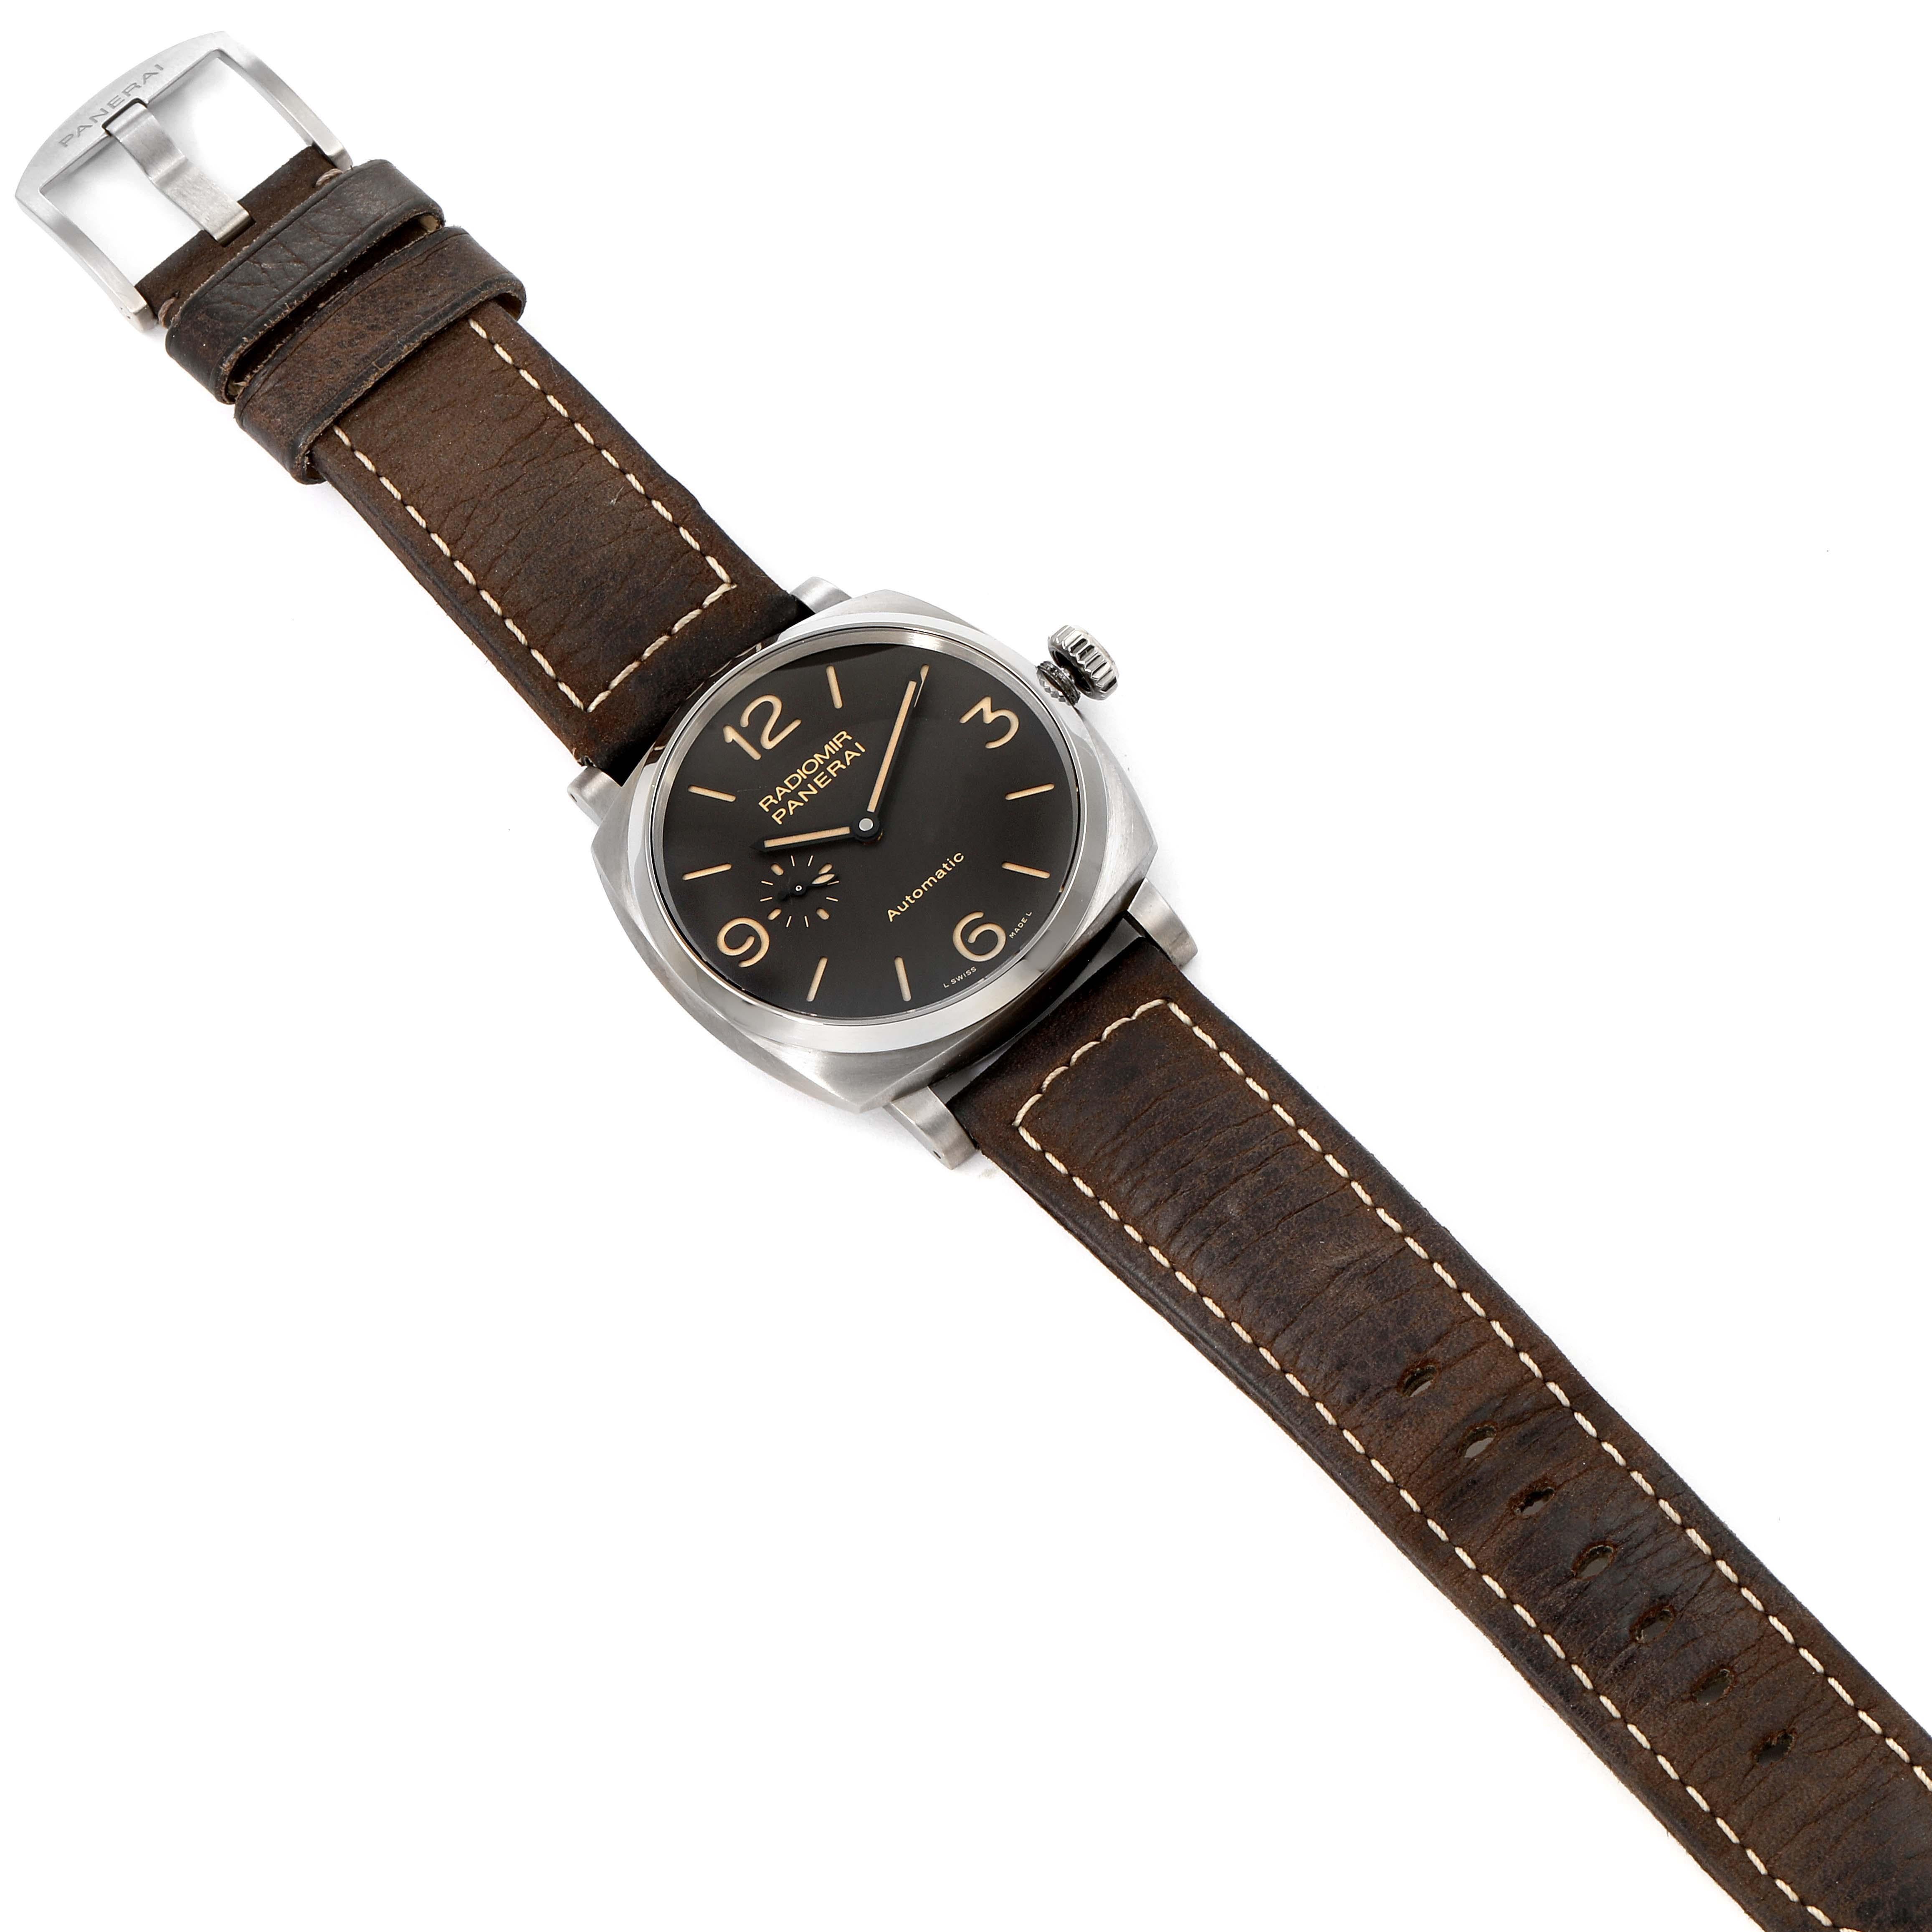 Panerai Radiomir Brown Dial 3 Days Titanium Watch PAM00619 Box Papers For Sale 2